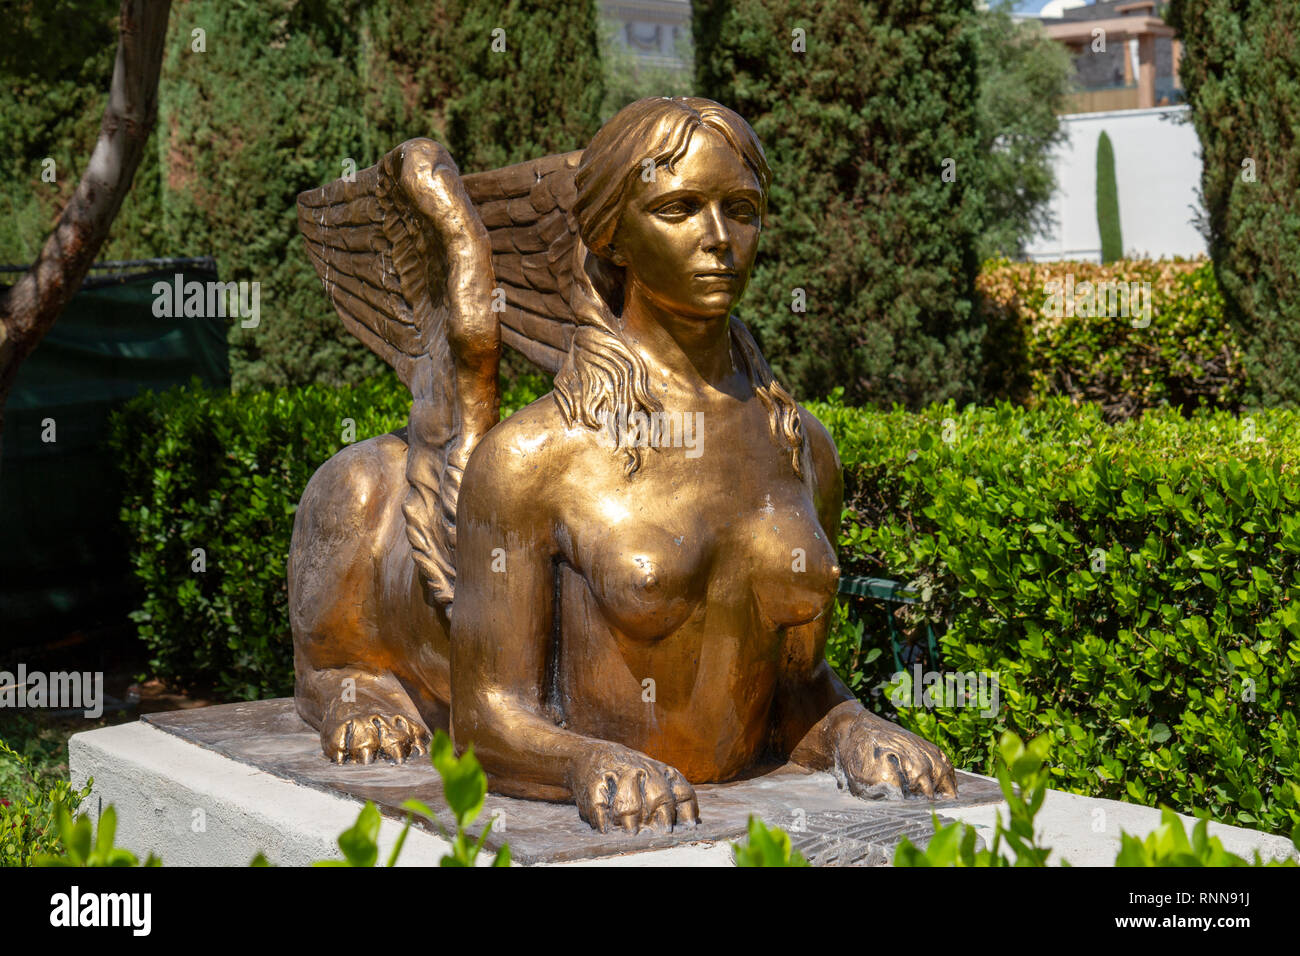 Winged lion woman figure at the entrance to Caesars Palace casino on The Strip, Las Vegas, Nevada, United States. Stock Photo